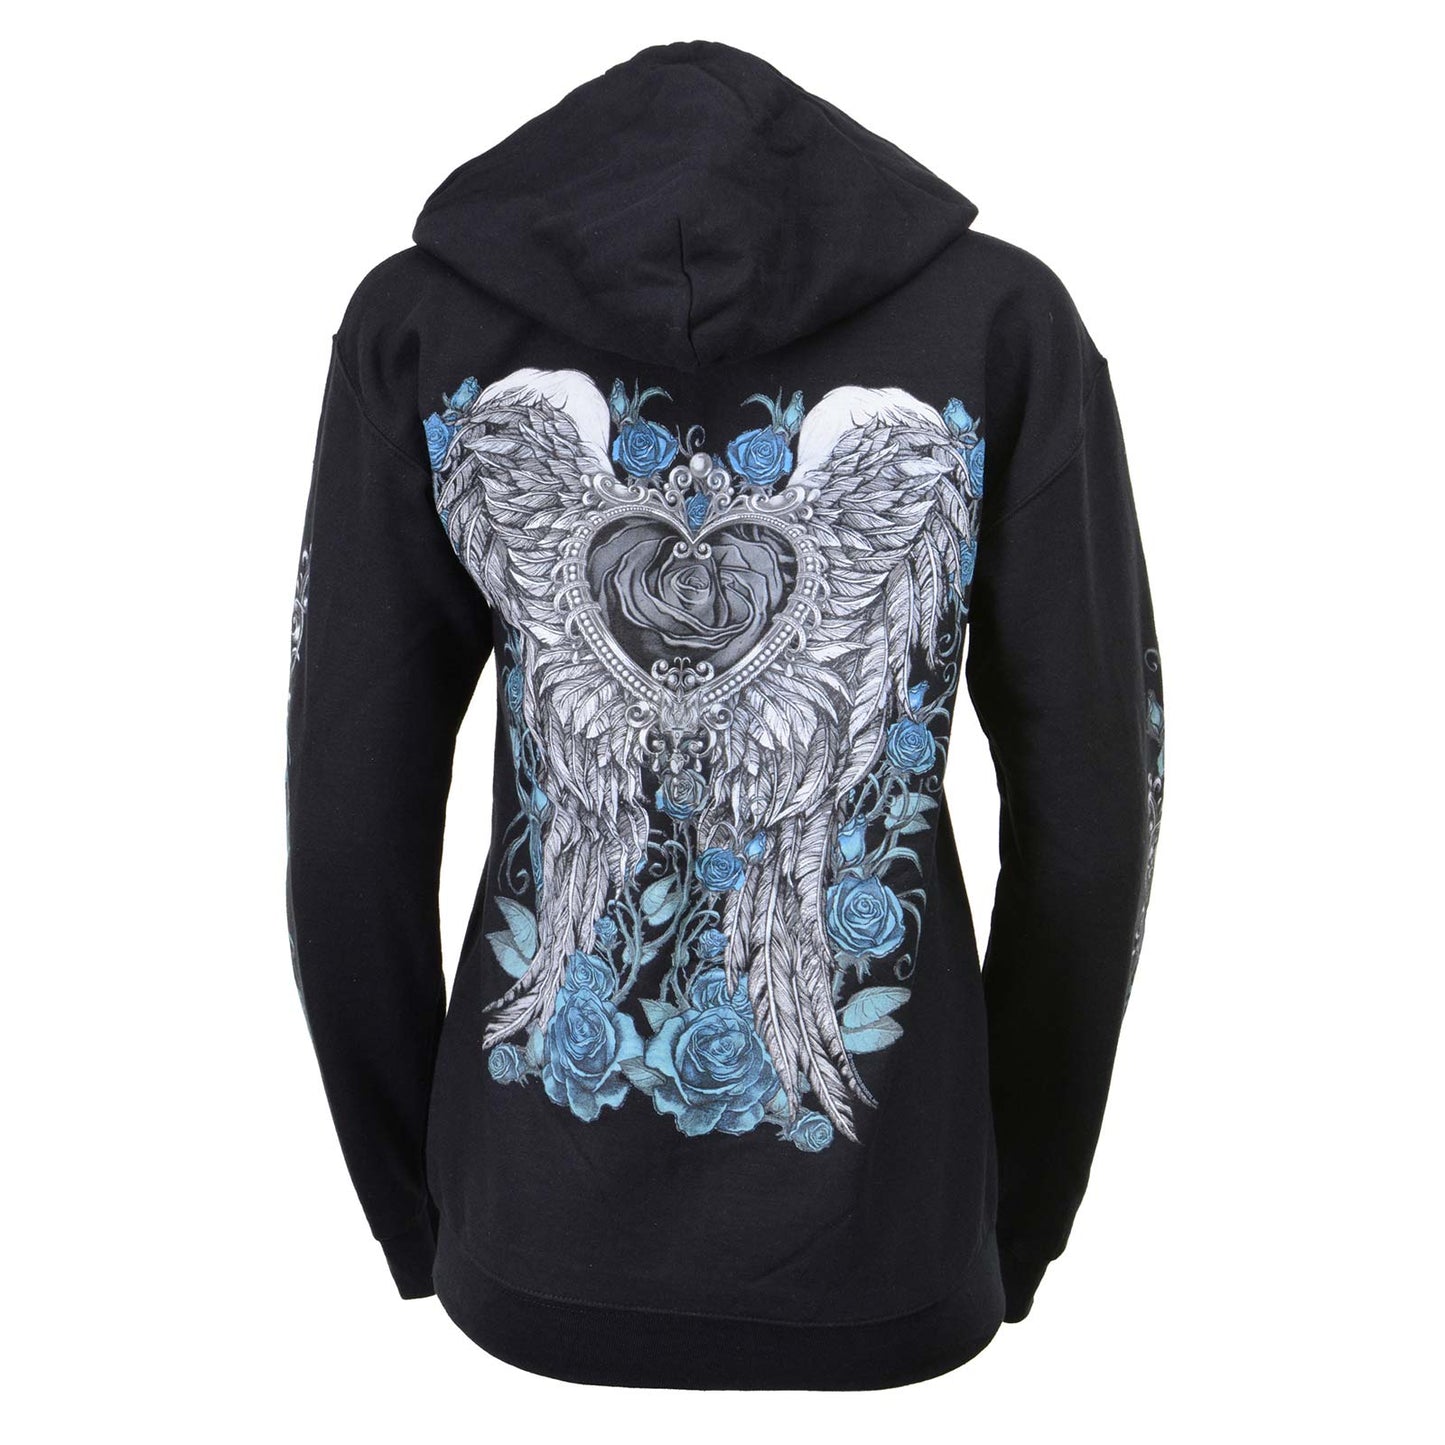 Milwaukee Leather MPLH228001 Women's 'Angel Roses' Zip Up Hooded Black Sweat Shirt